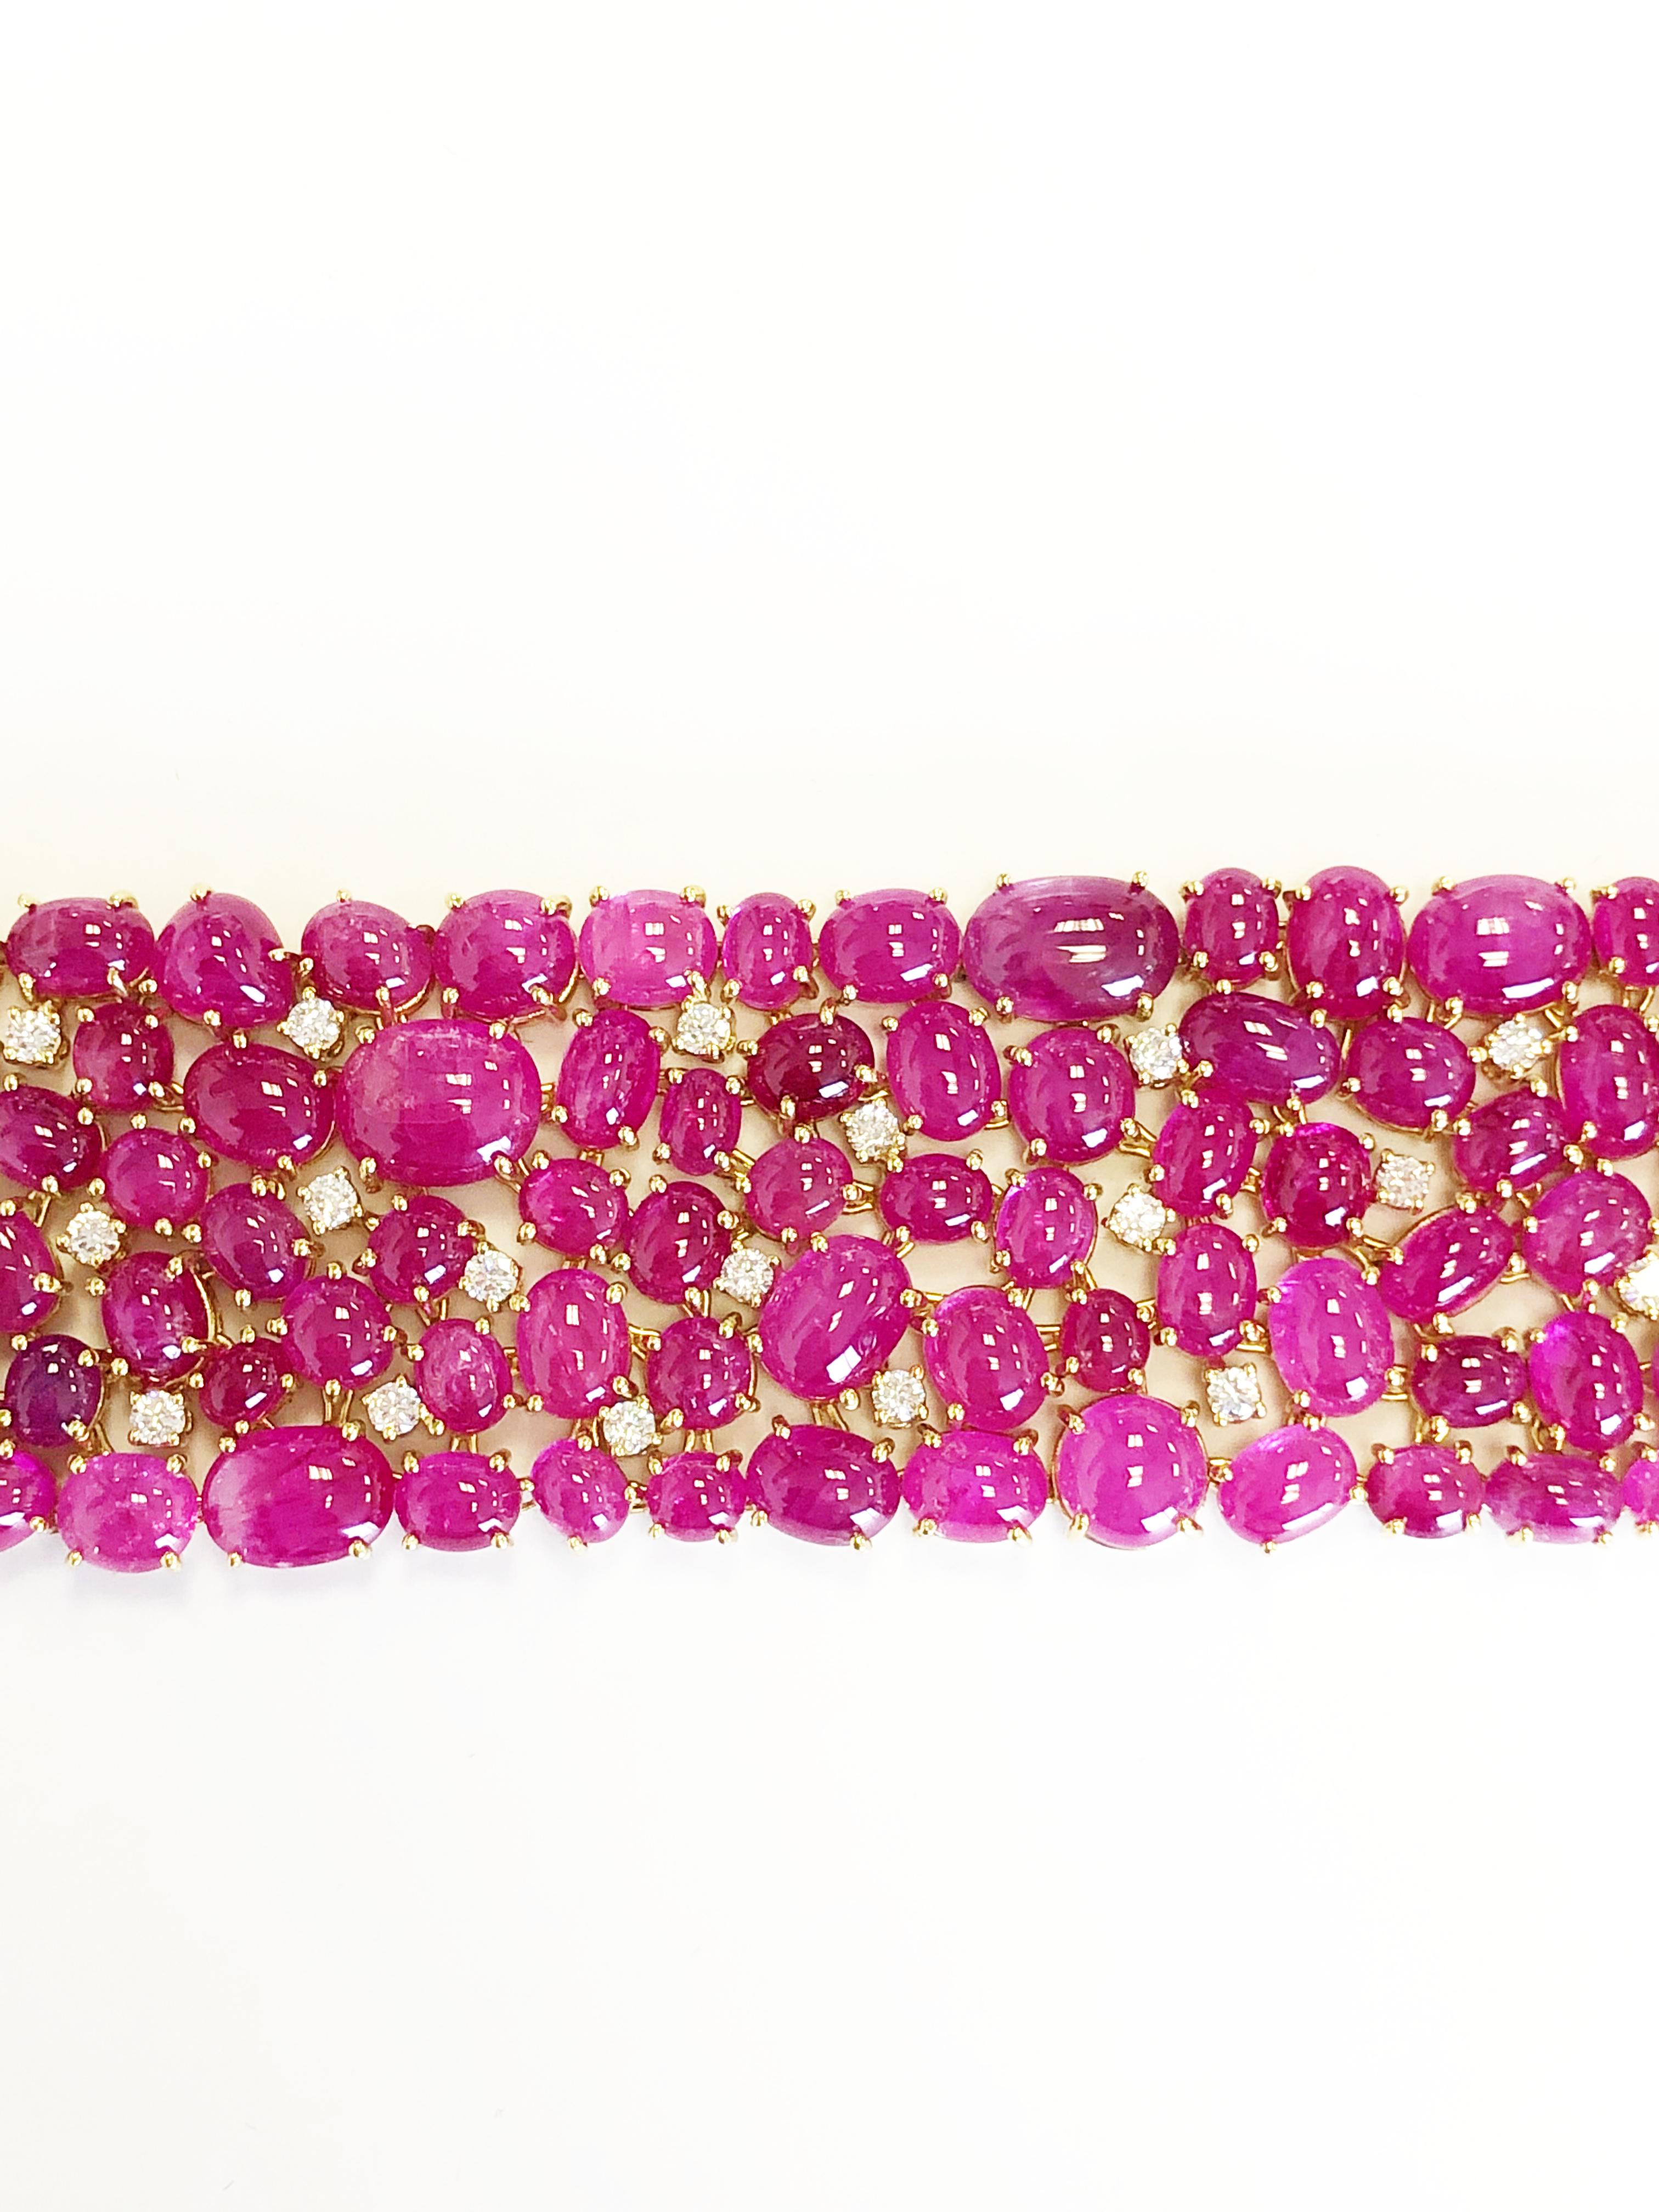 Oval Cut Burma Ruby Cabochon and White Diamond Cluster Bracelet in 18 Karat Yellow Gold For Sale